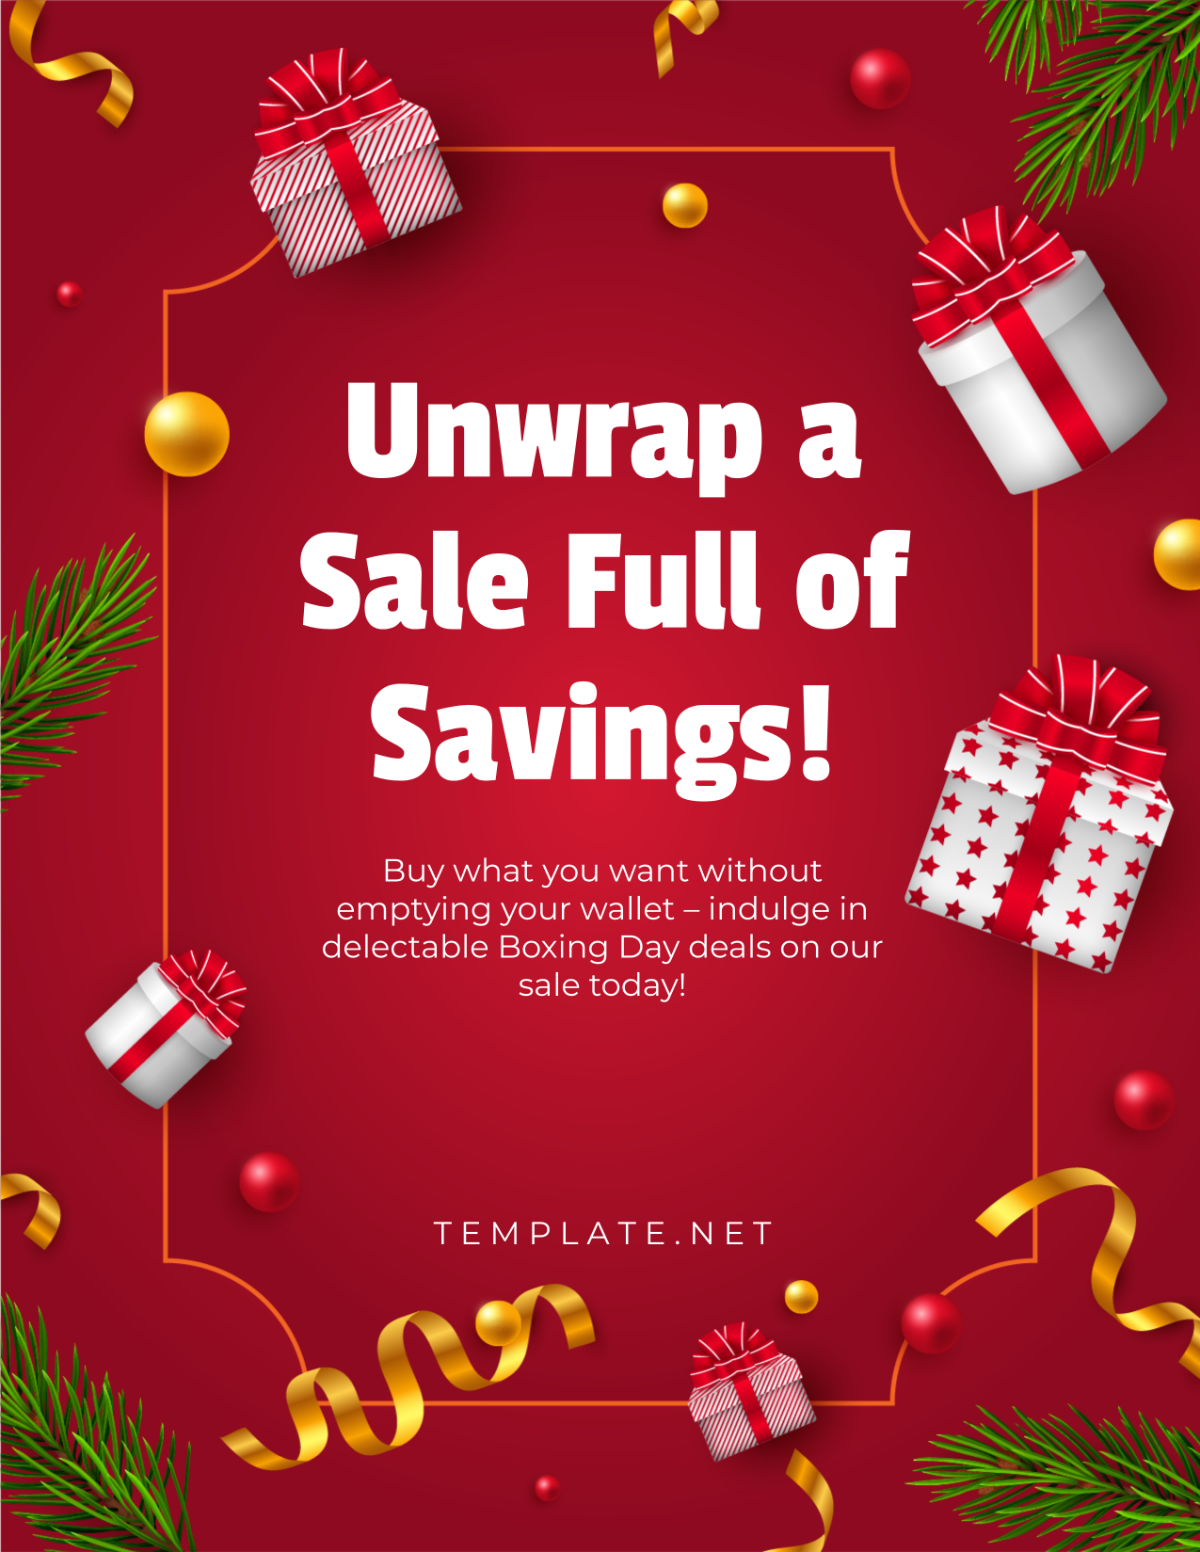 Free Boxing Day Sale Deals Template